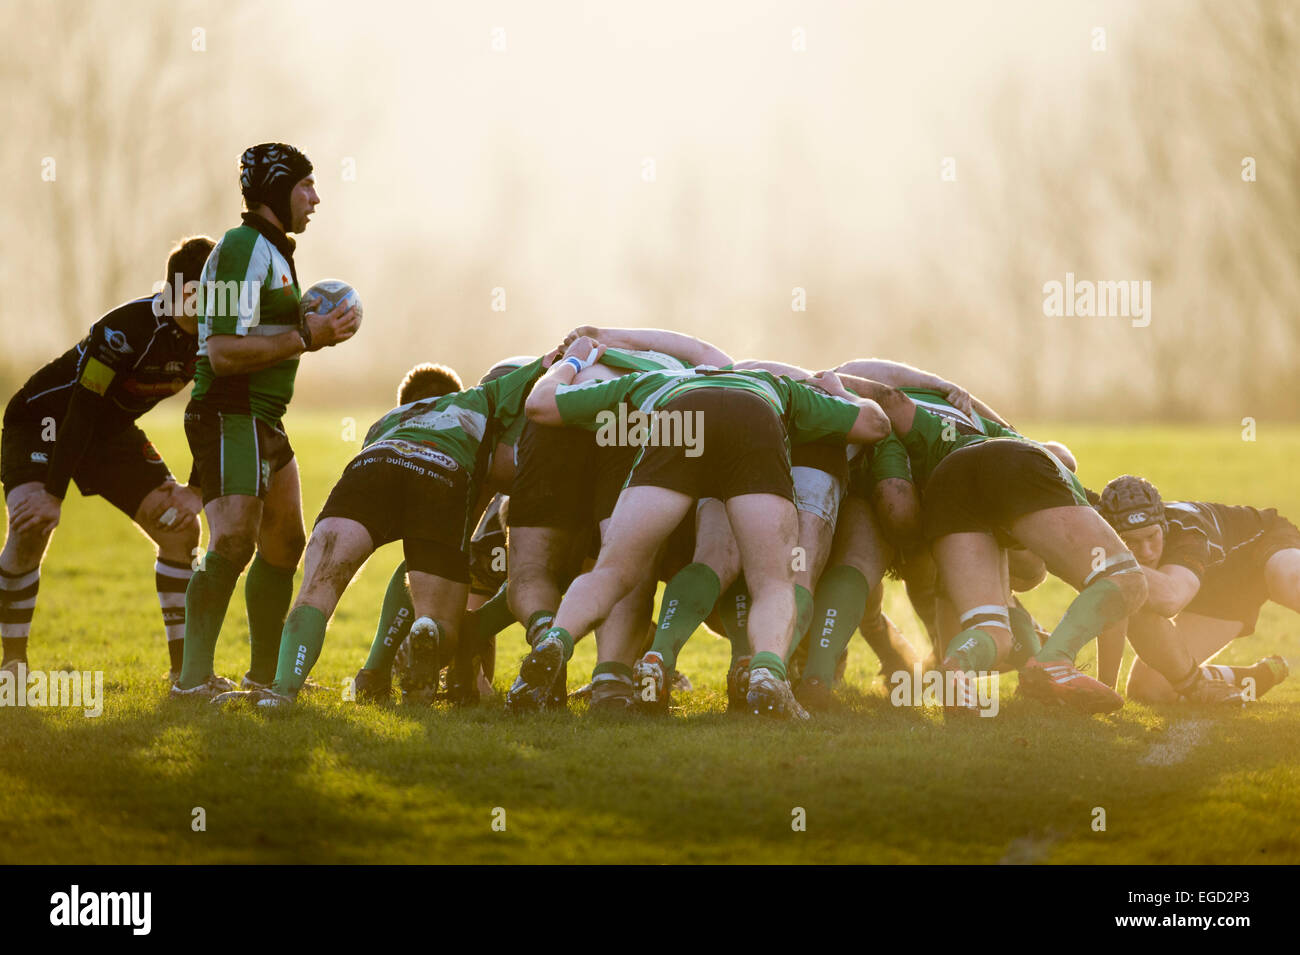 Rugby scrummage. Stock Photo